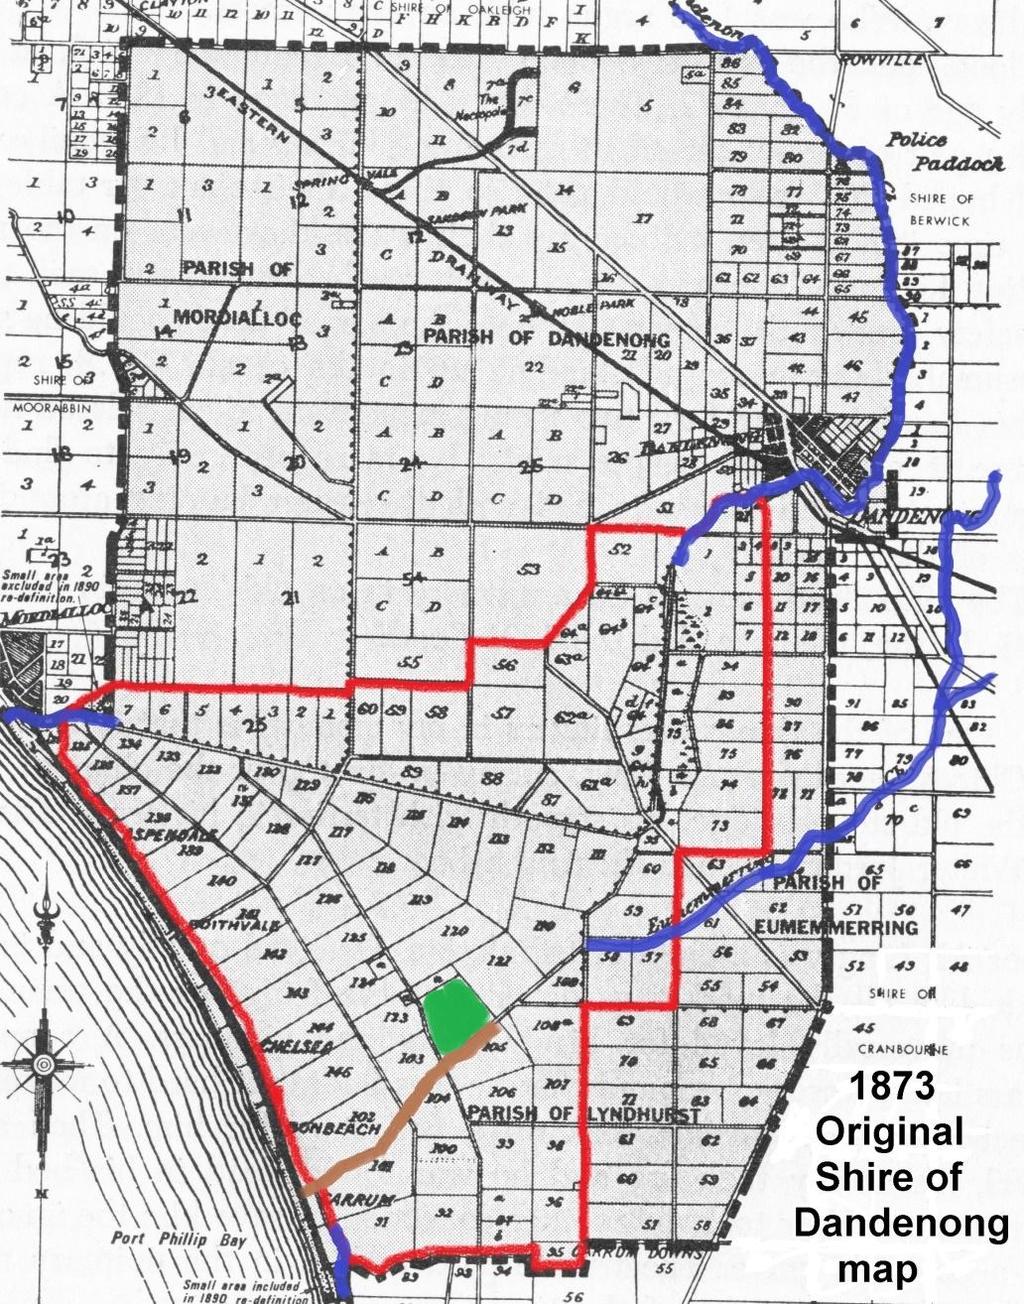 Map section 1873 Original Shire of Dandenong map Added Features Red Boundary of the Carrum Swamp irrigation area Blue From top: Dandenong Creek From right: Eumemmerring Creek To